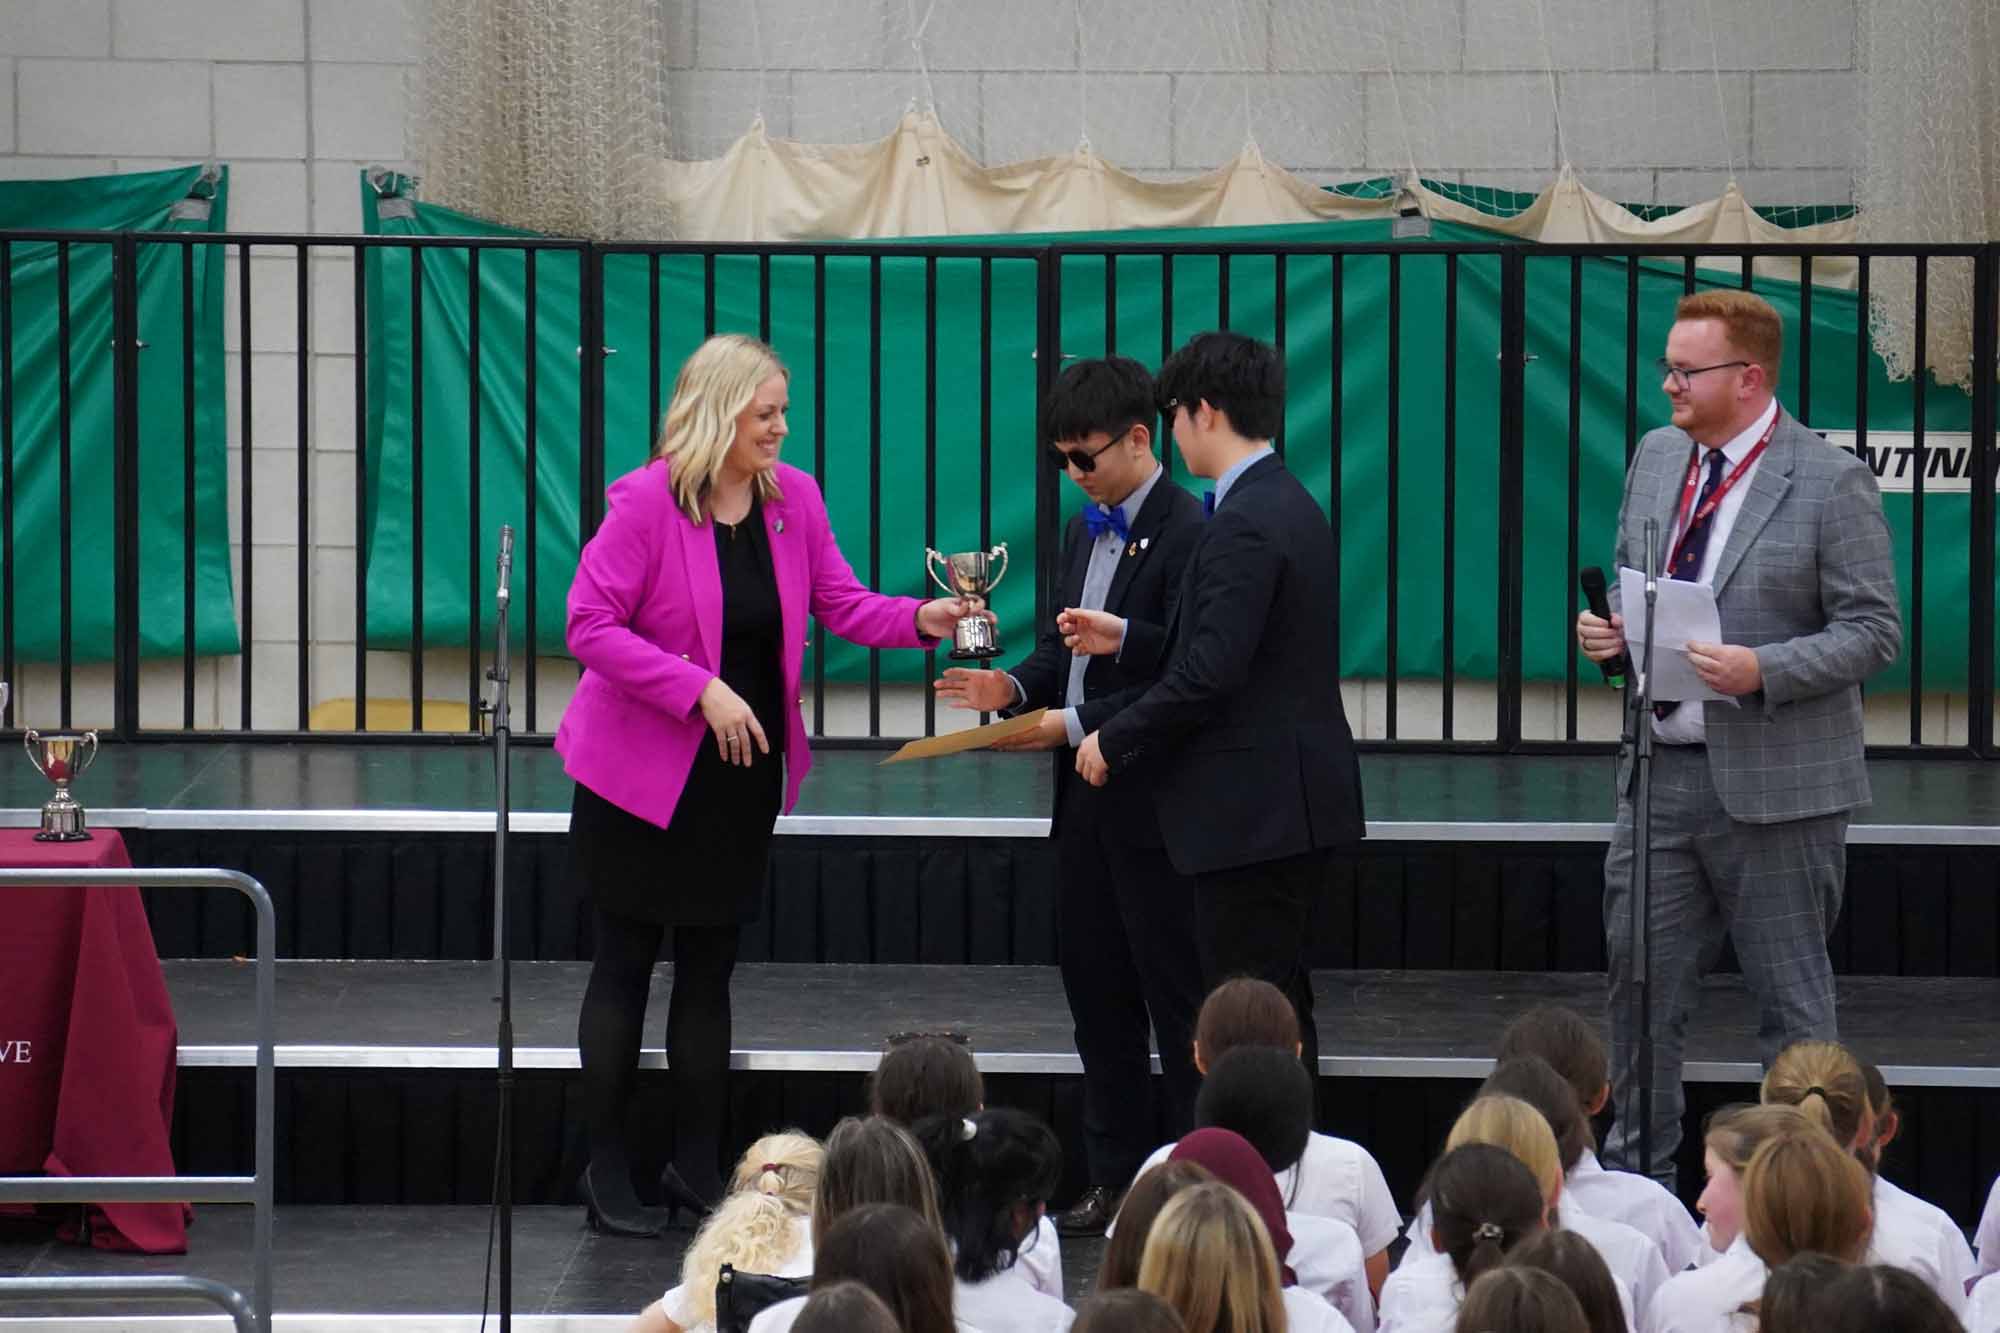 House Song 2022 - Results - Best Creative Performance awarded to Elmshurst